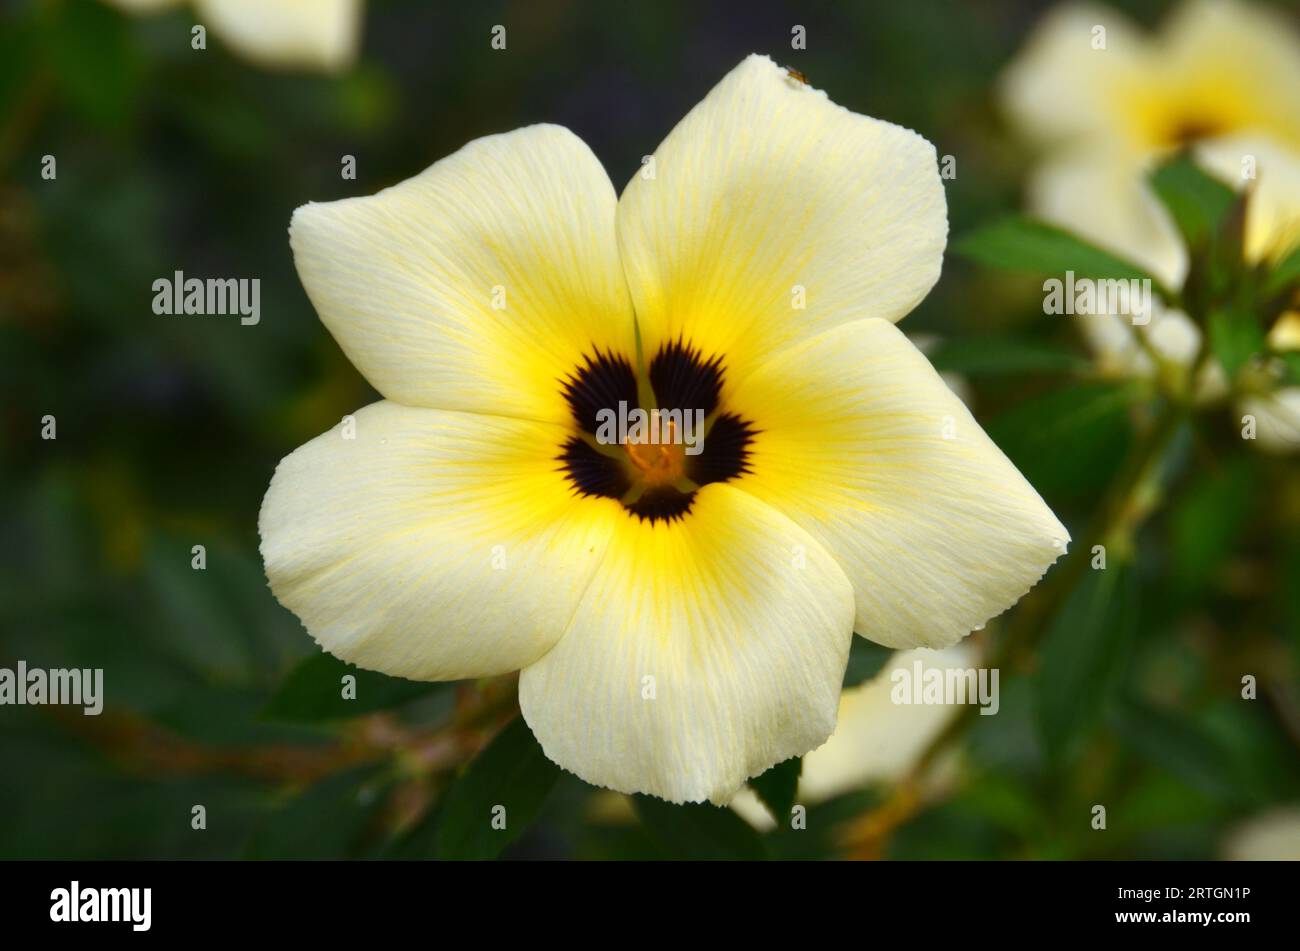 White Buttercup flowers bloom in the garden, the petals are white with a combination of yellow and brown in the middle. Stock Photo